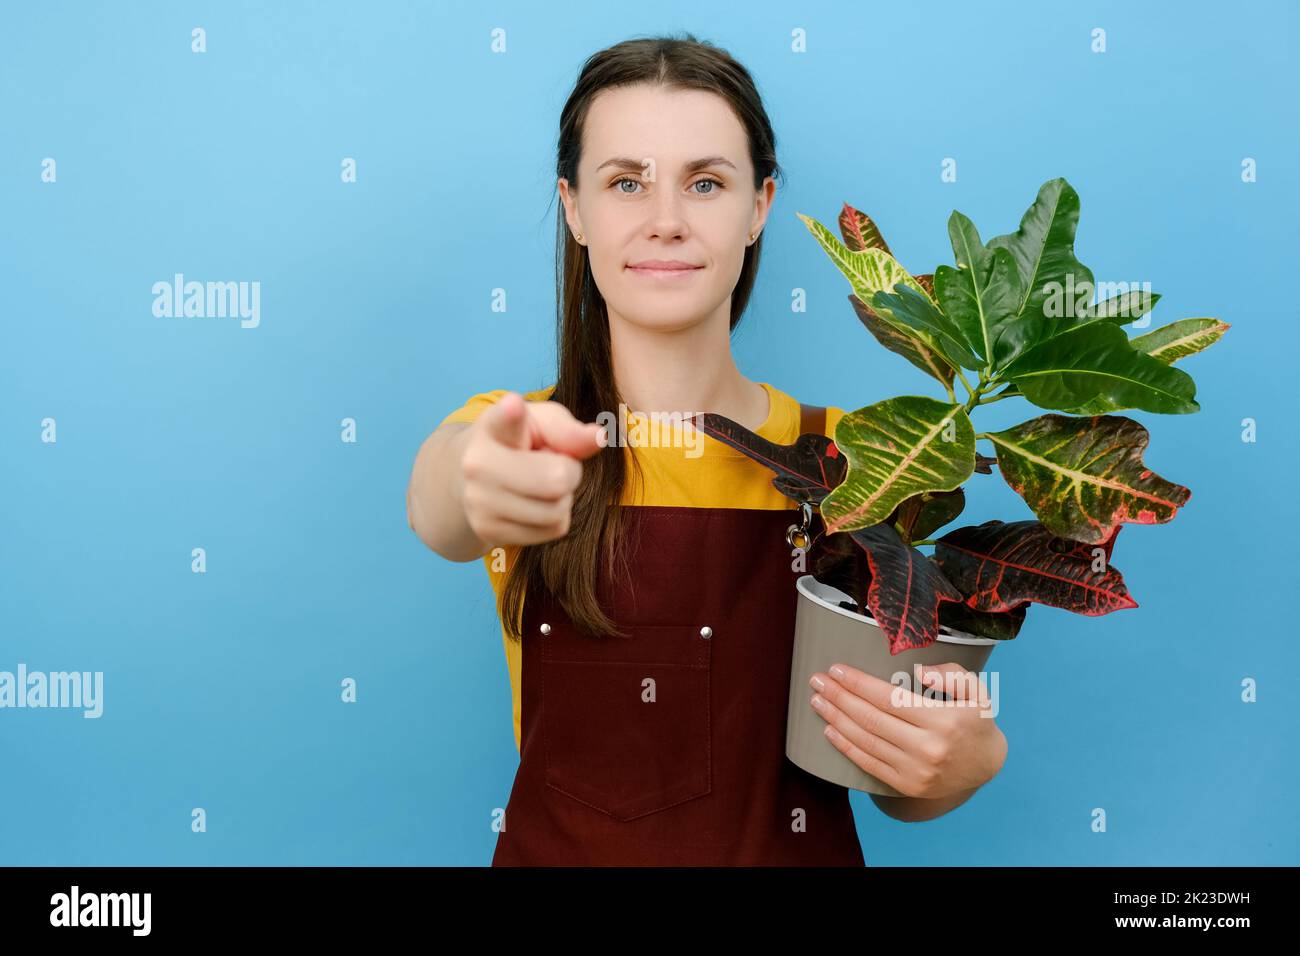 Portrait of cheerful young woman florist points at camera, has broad smile, holding potted plant, wears apron, poses against blue background with copy Stock Photo